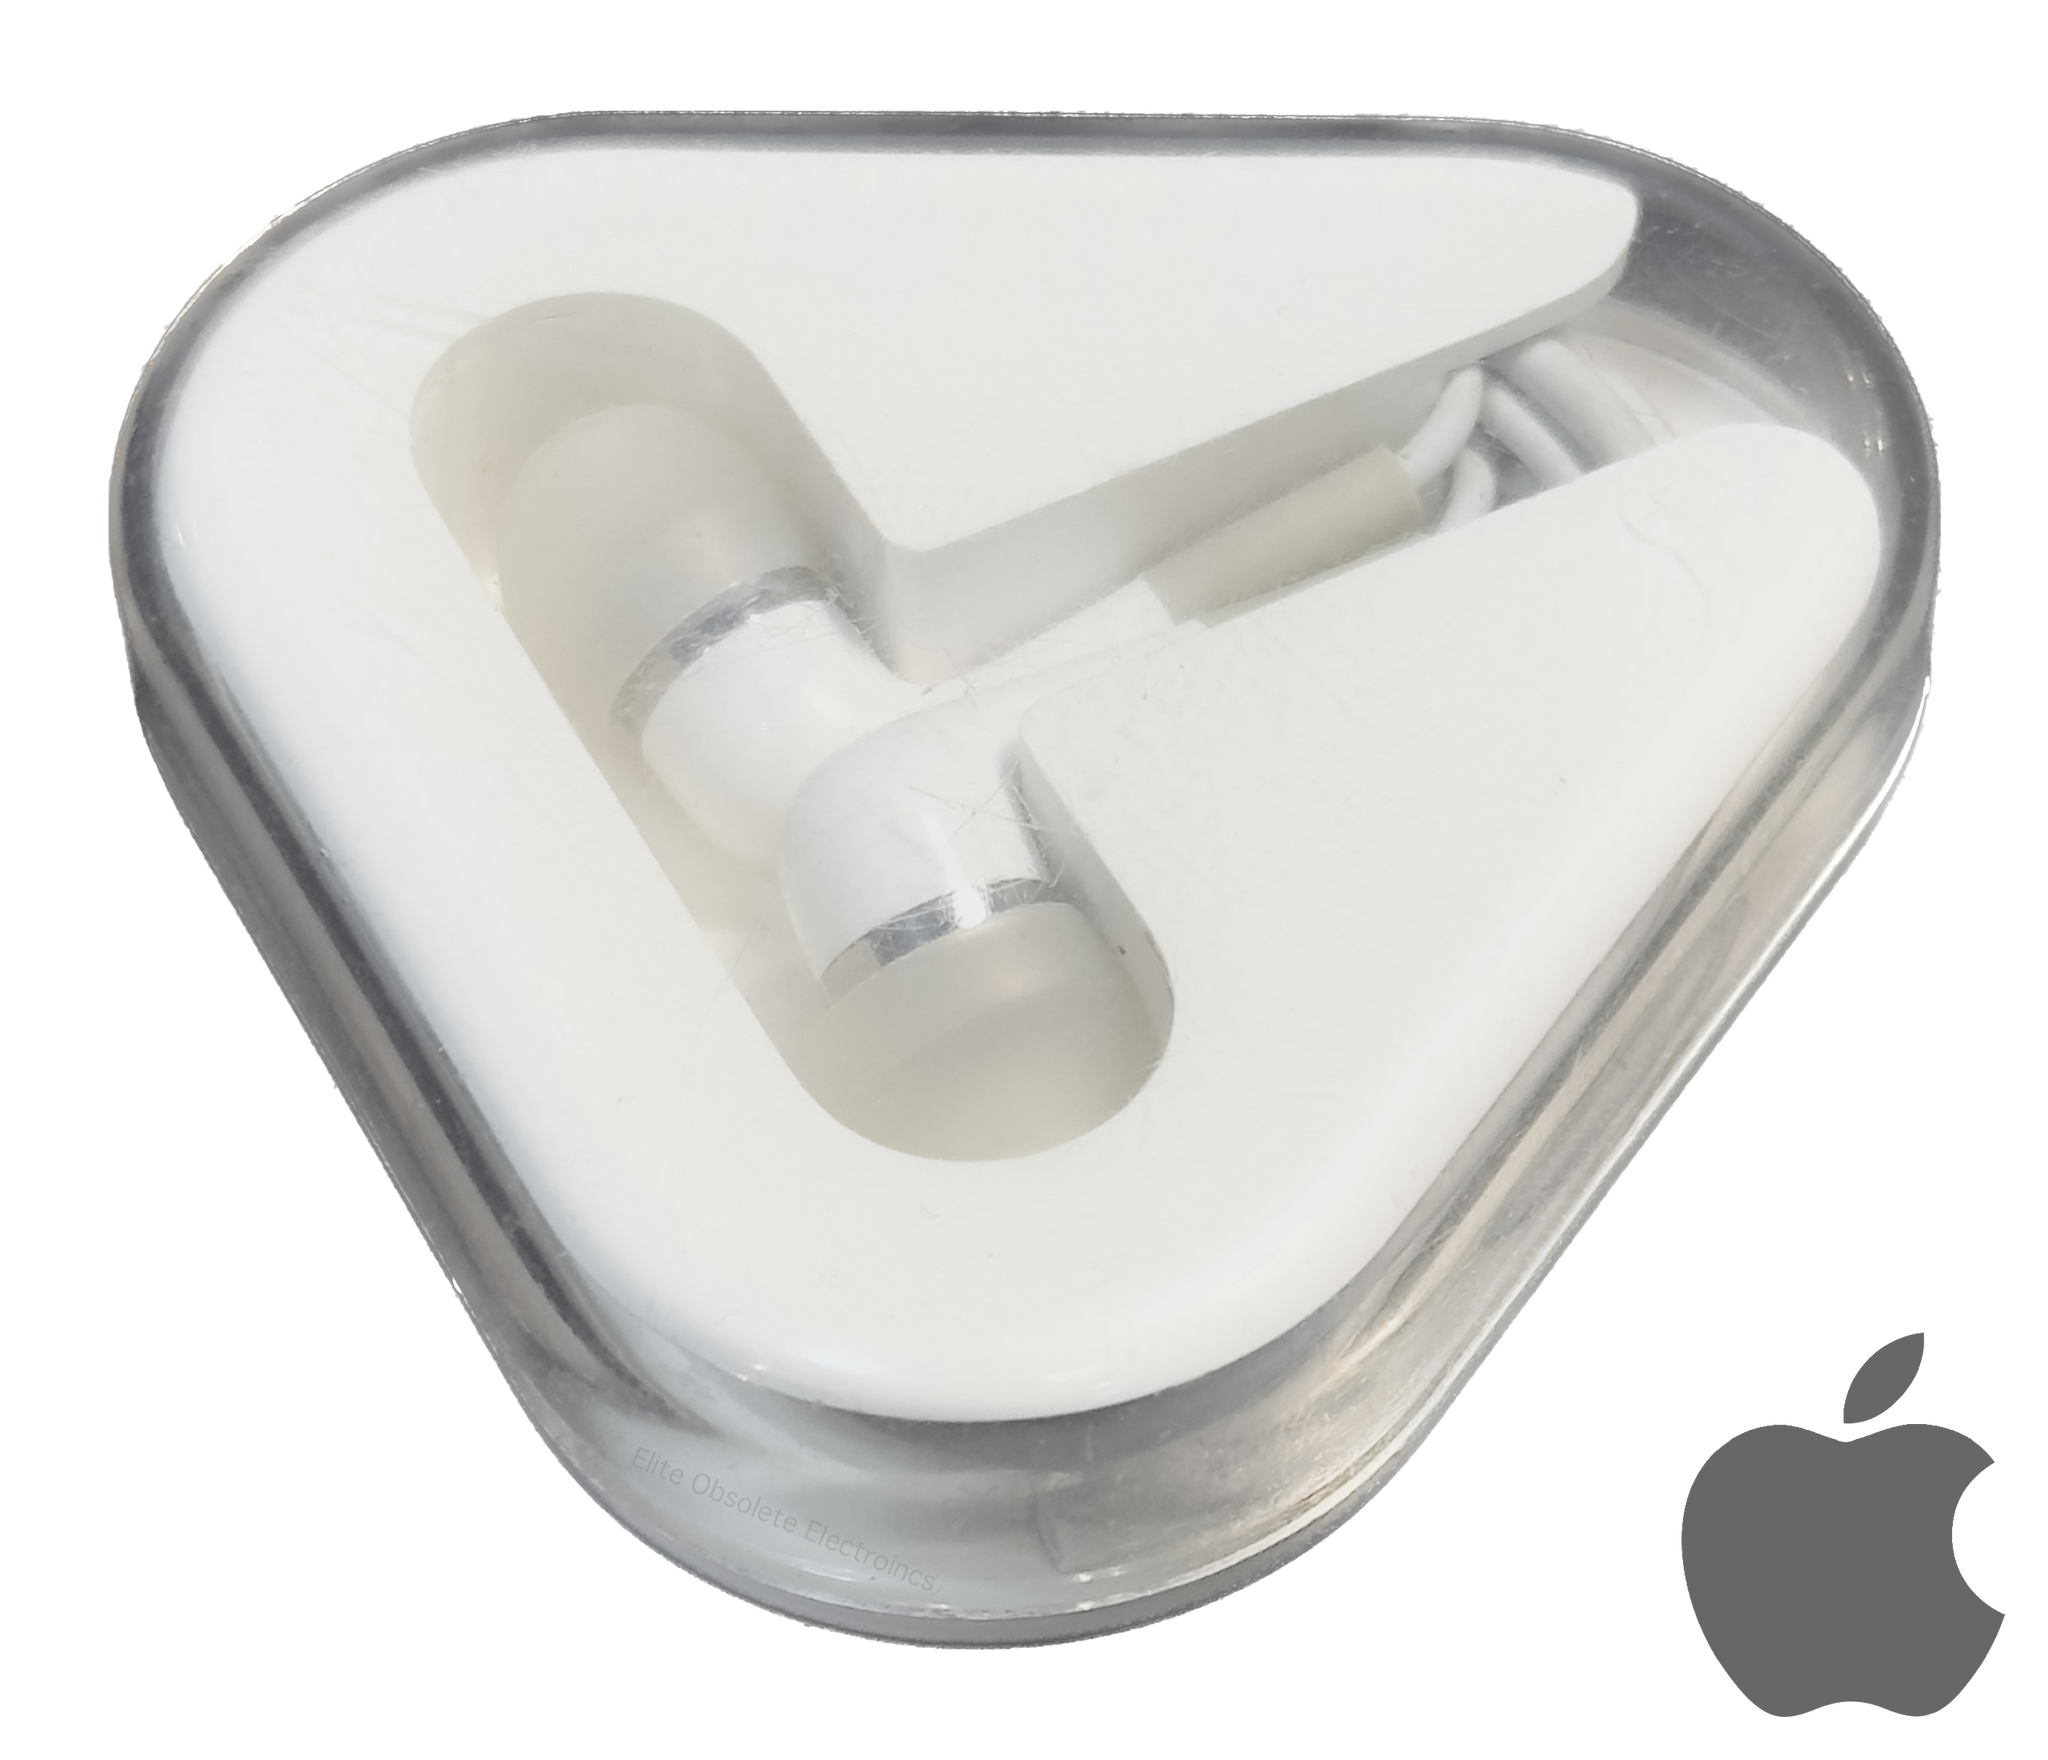 Original Apple ‘iPod In-Ear Headphones with Inline Remote and Microphone’ 2008 Earbuds Wired 3.5mm MA850G/B